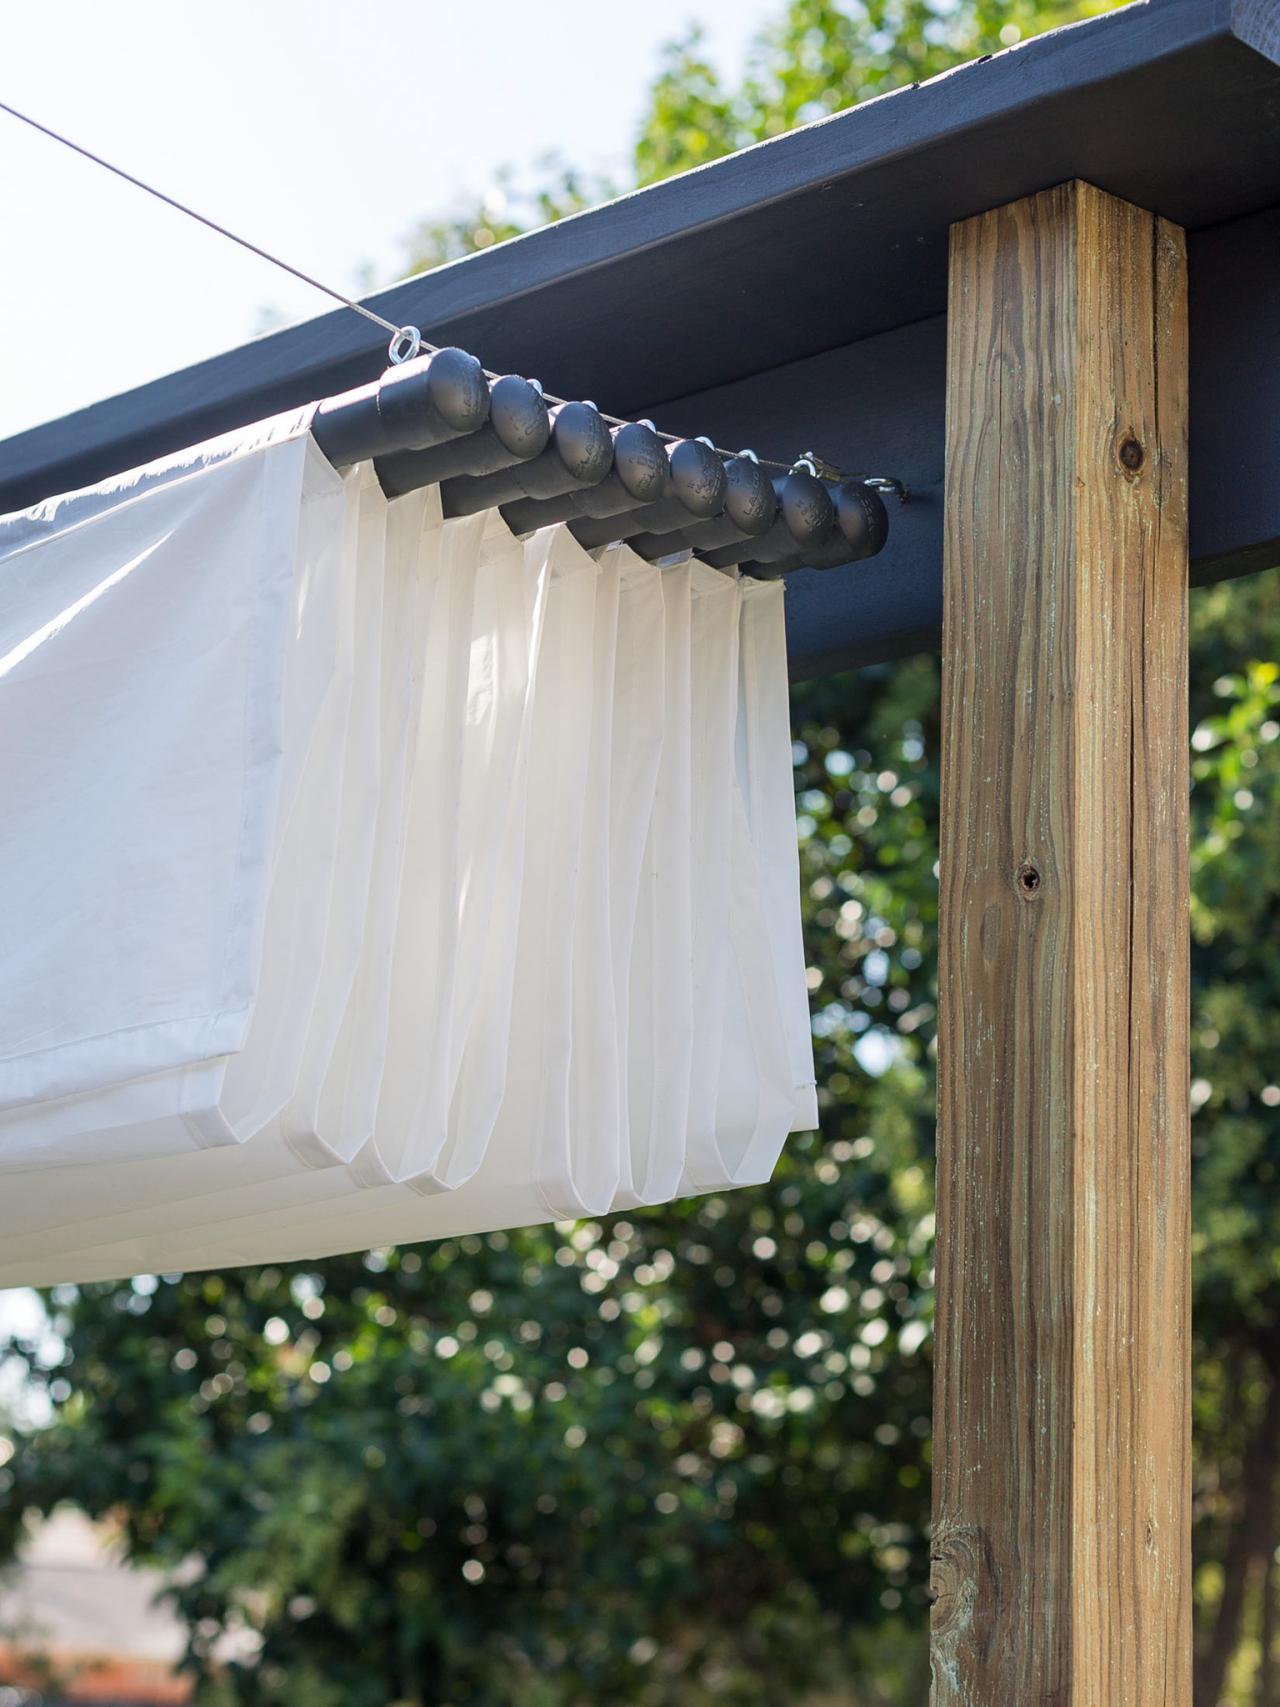 How To Build An Outdoor Canopy, Build Your Own Outdoor Canopy